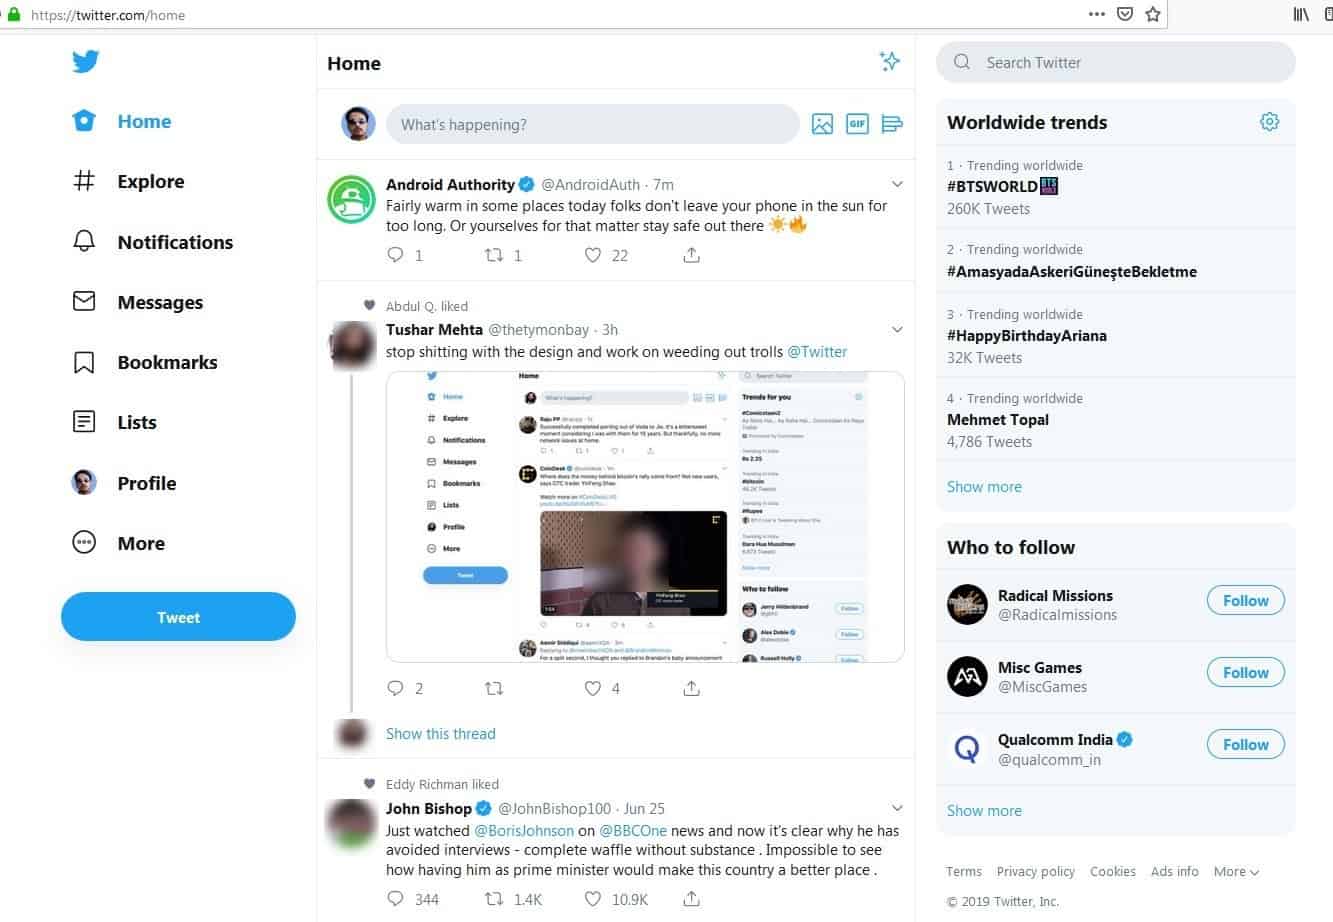 Any way to disable new (annoying) follow topic suggestions? : r/Twitter